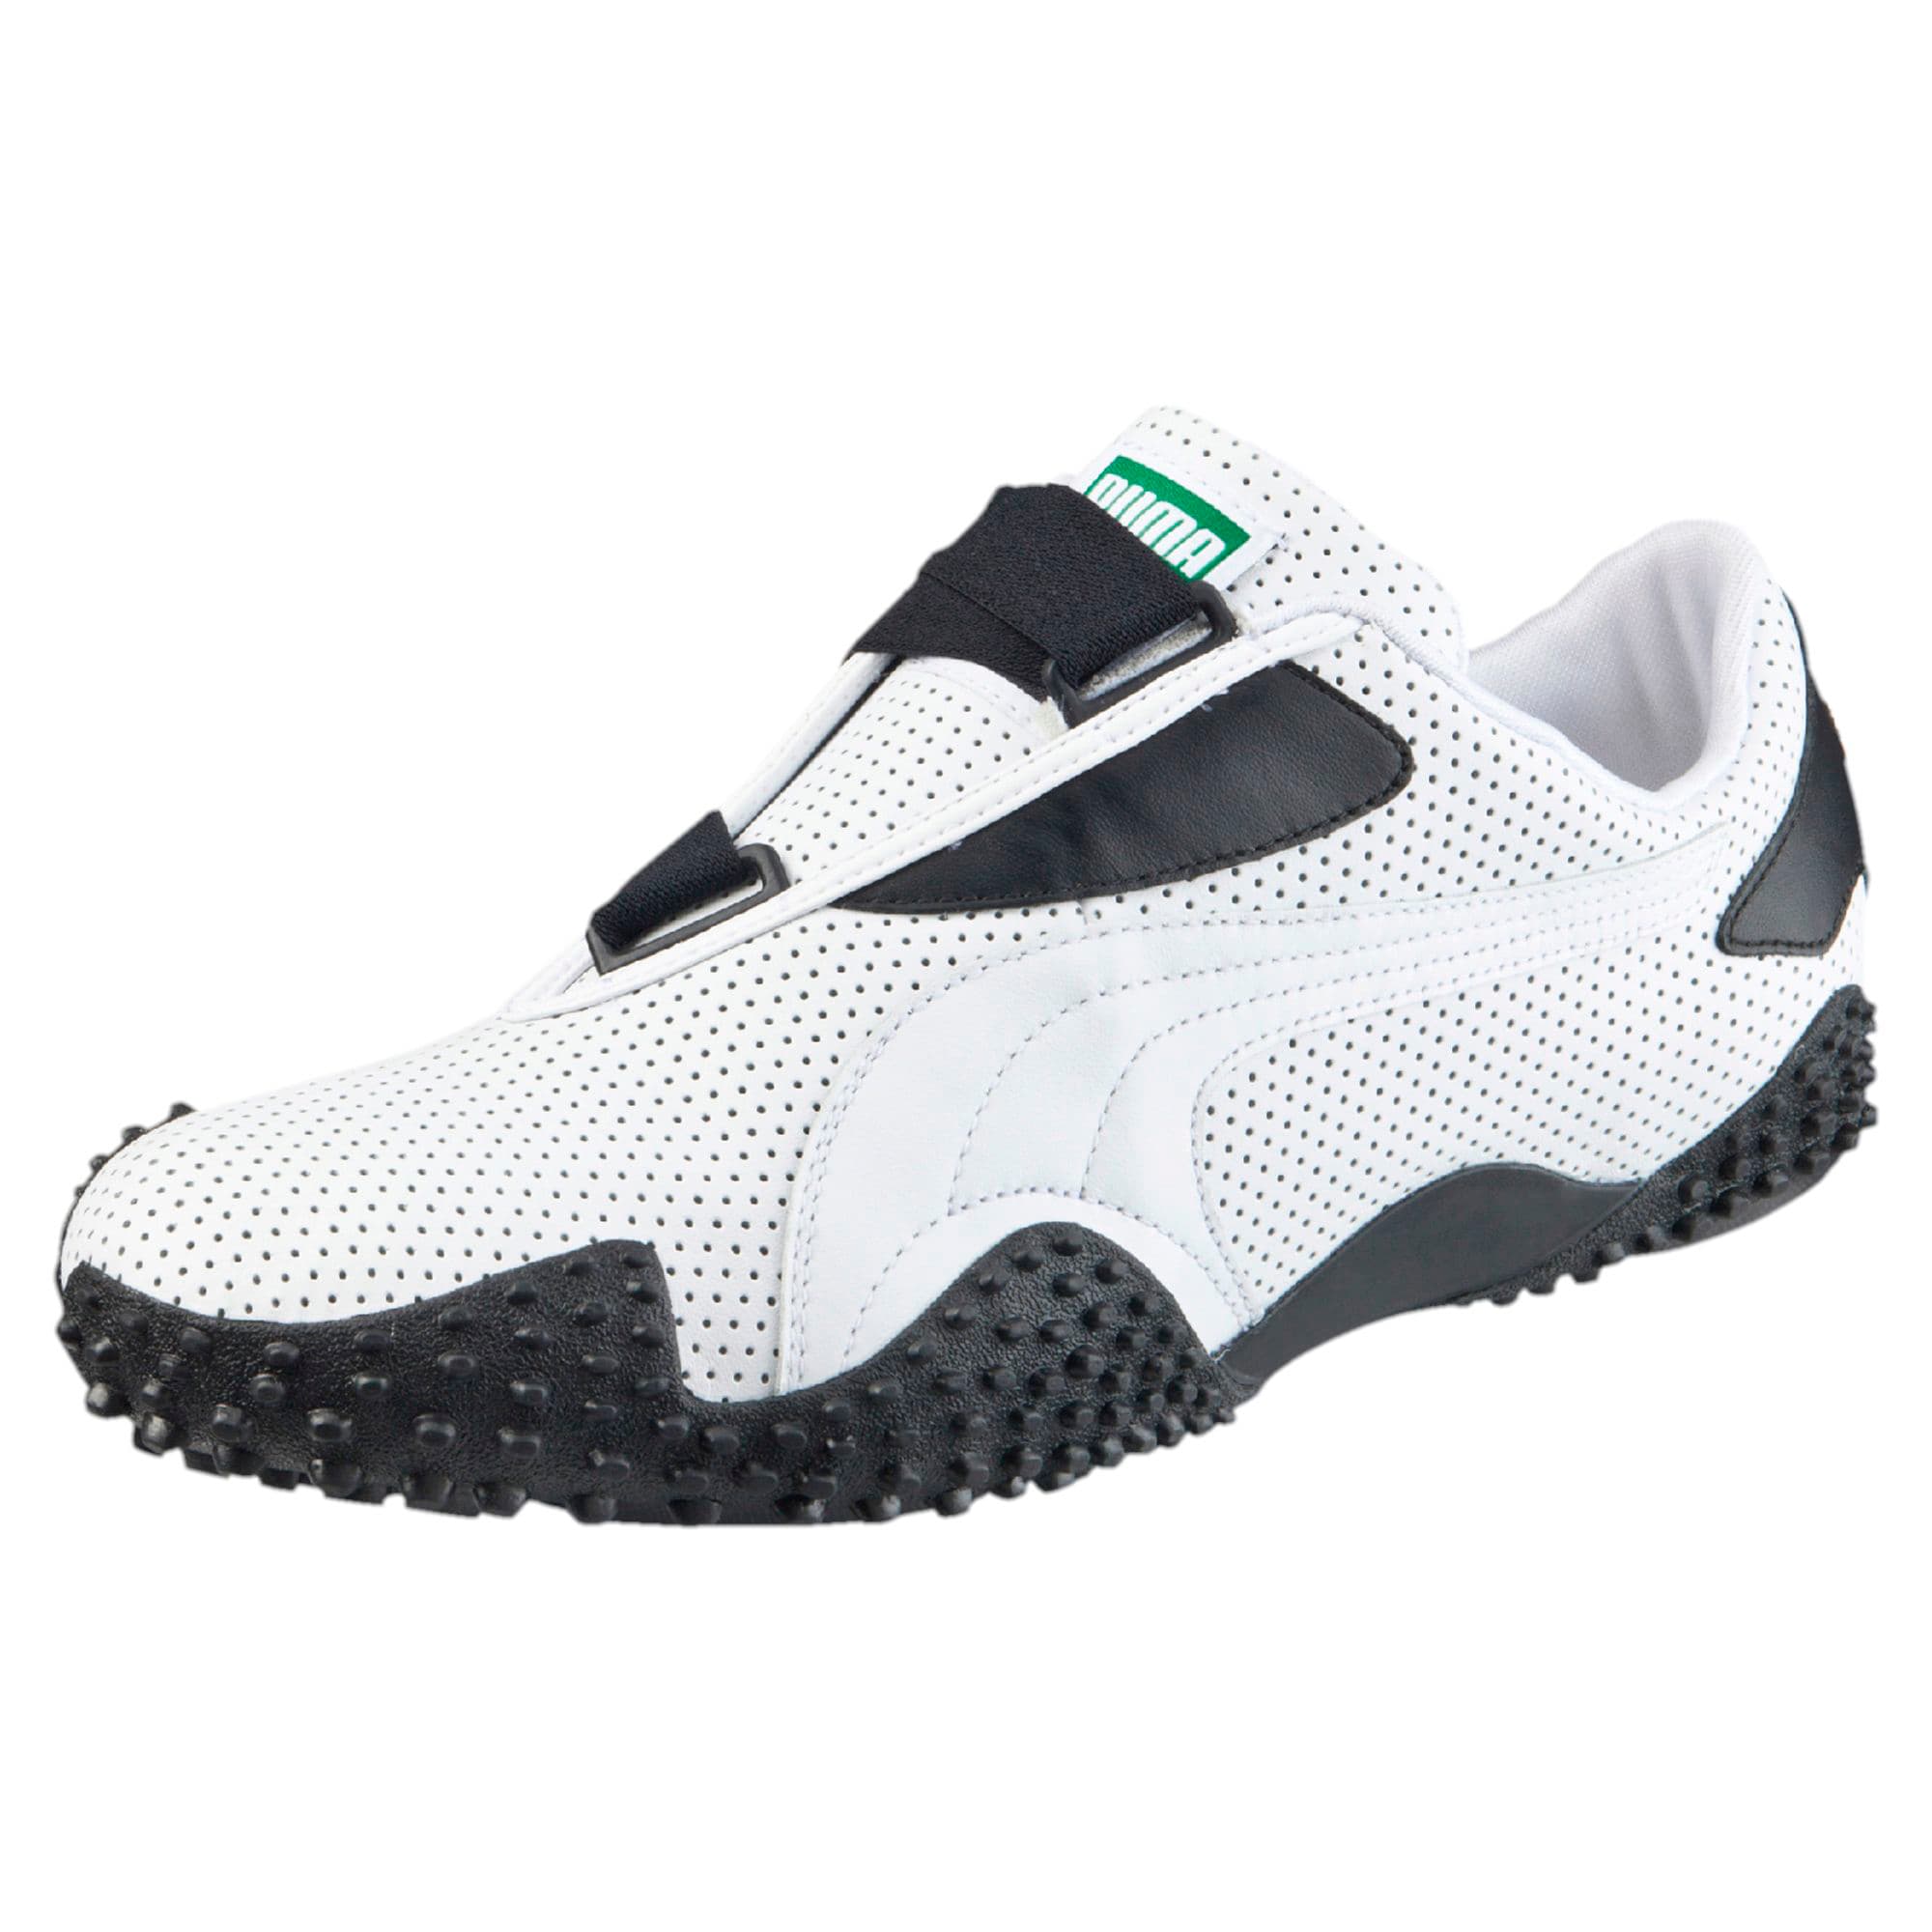 Mostro Perforated Leather | PUMA Best 